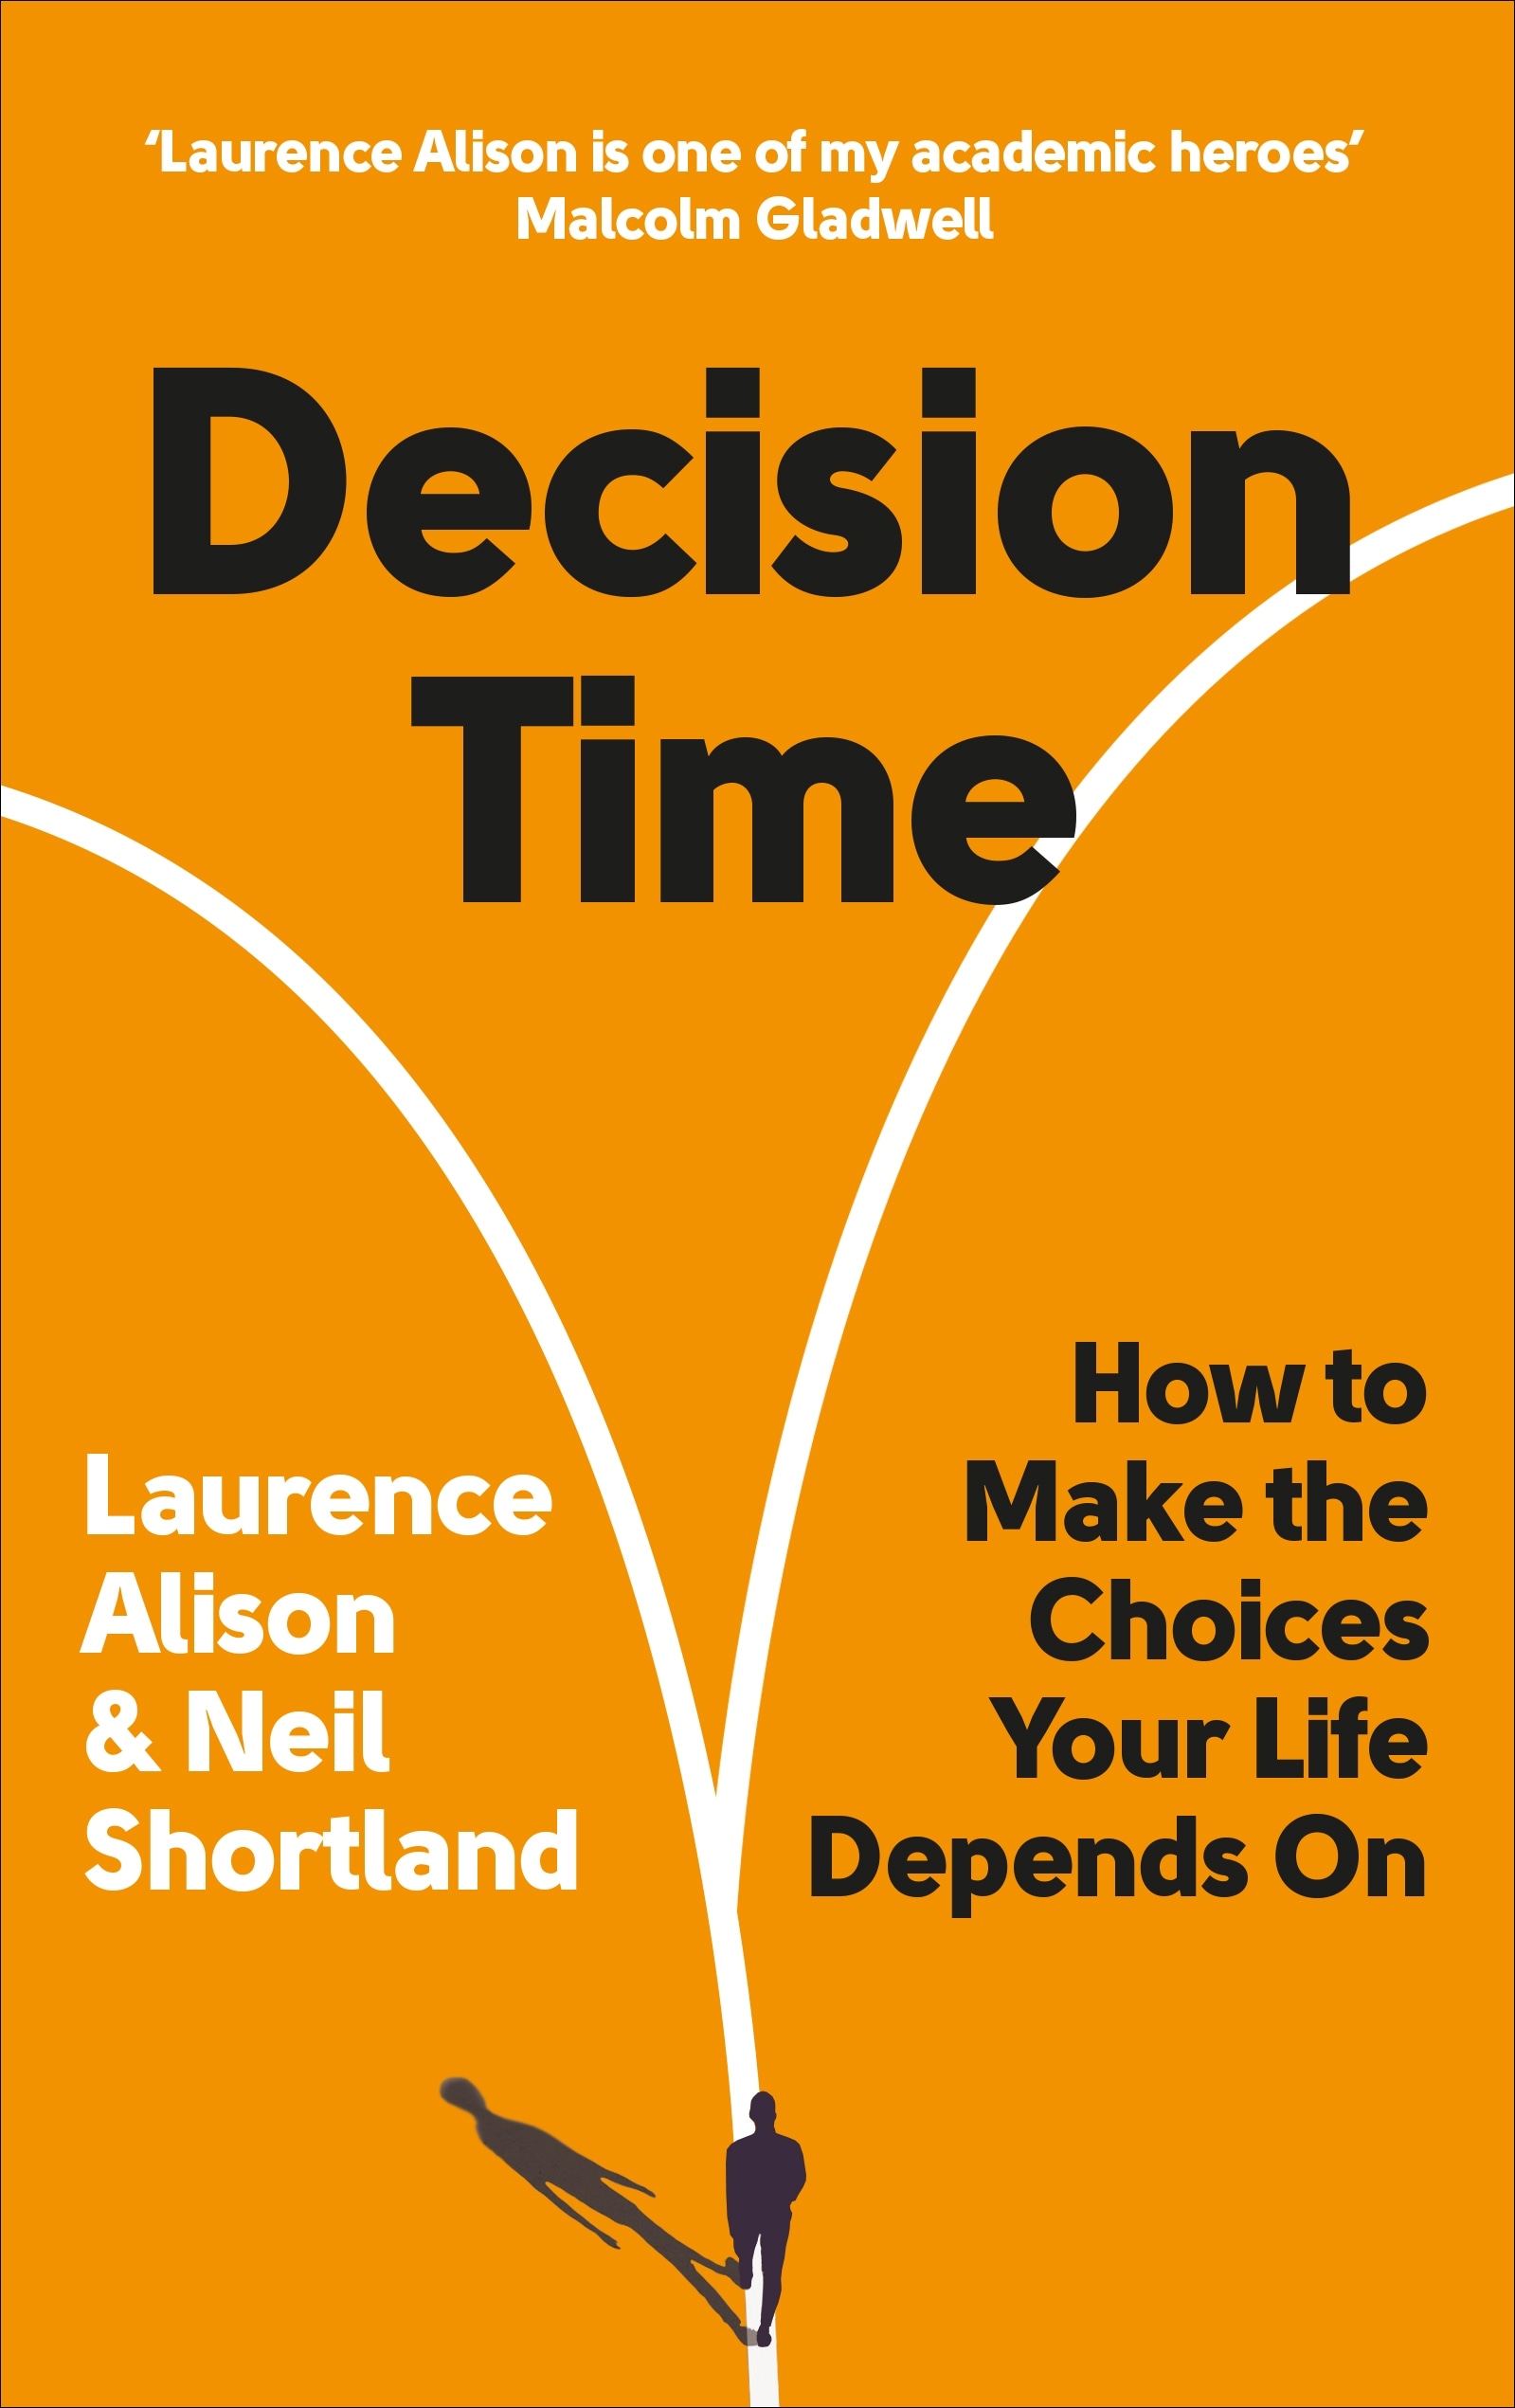 Book “Decision Time” by Laurence Alison, Neil Shortland — October 7, 2021